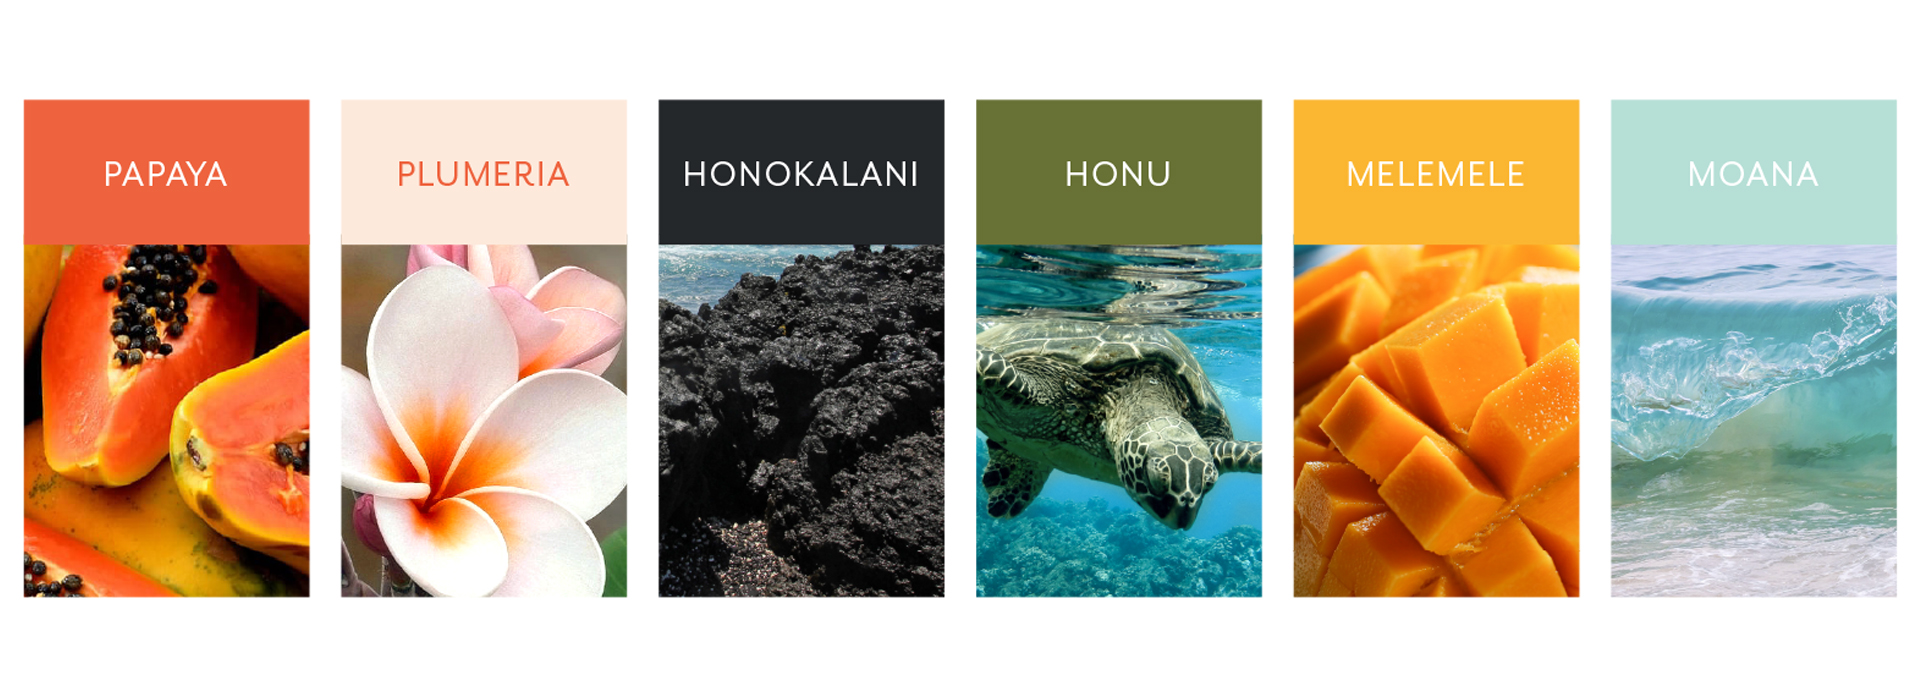 Color palette reflects the natural beauty and vibrant color found in Maui.